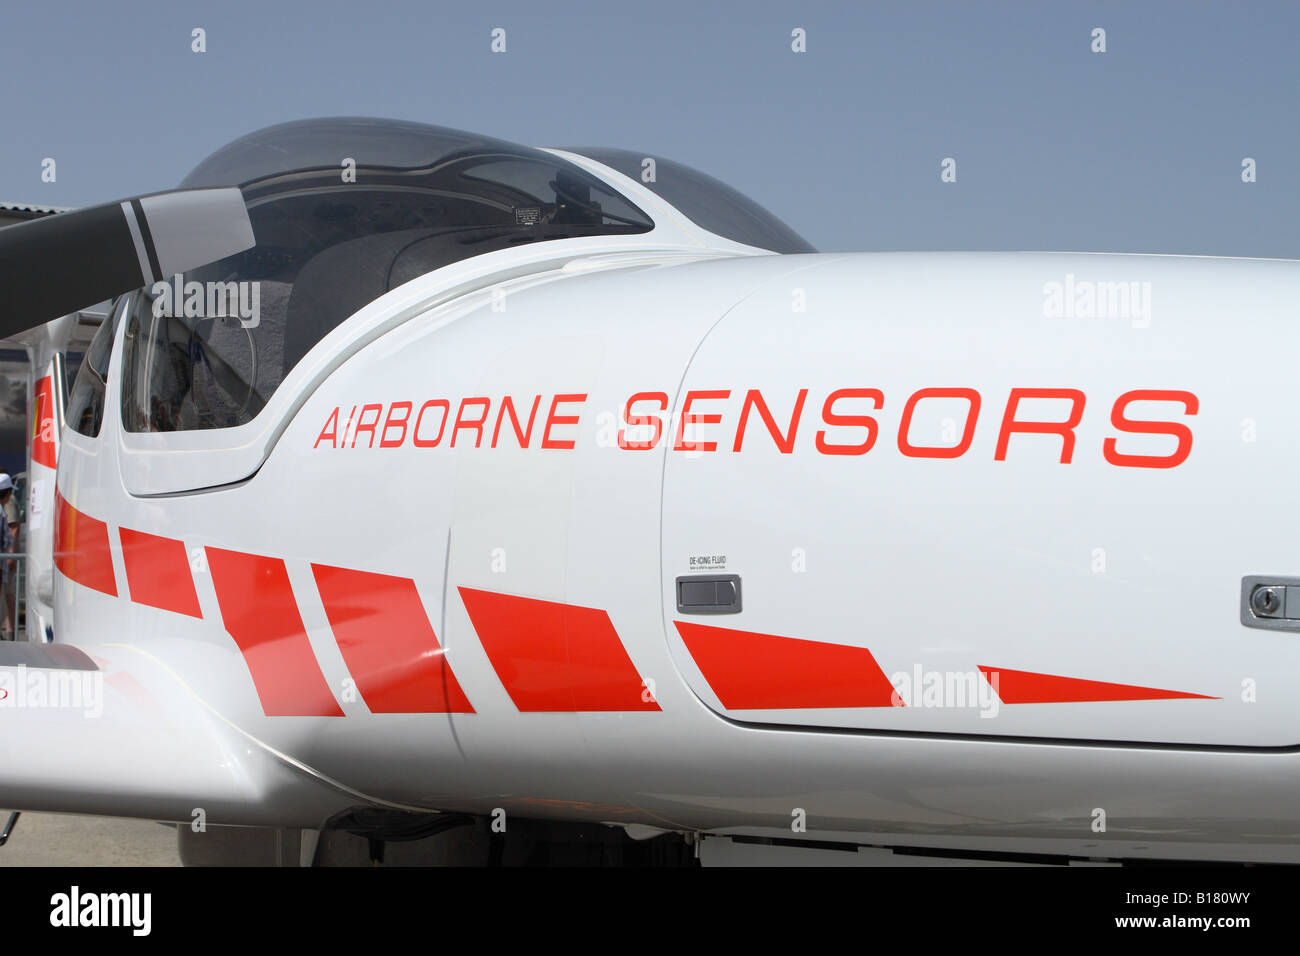 Research aircraft fitted with airborne sensors for aerial survey work Stock Photo